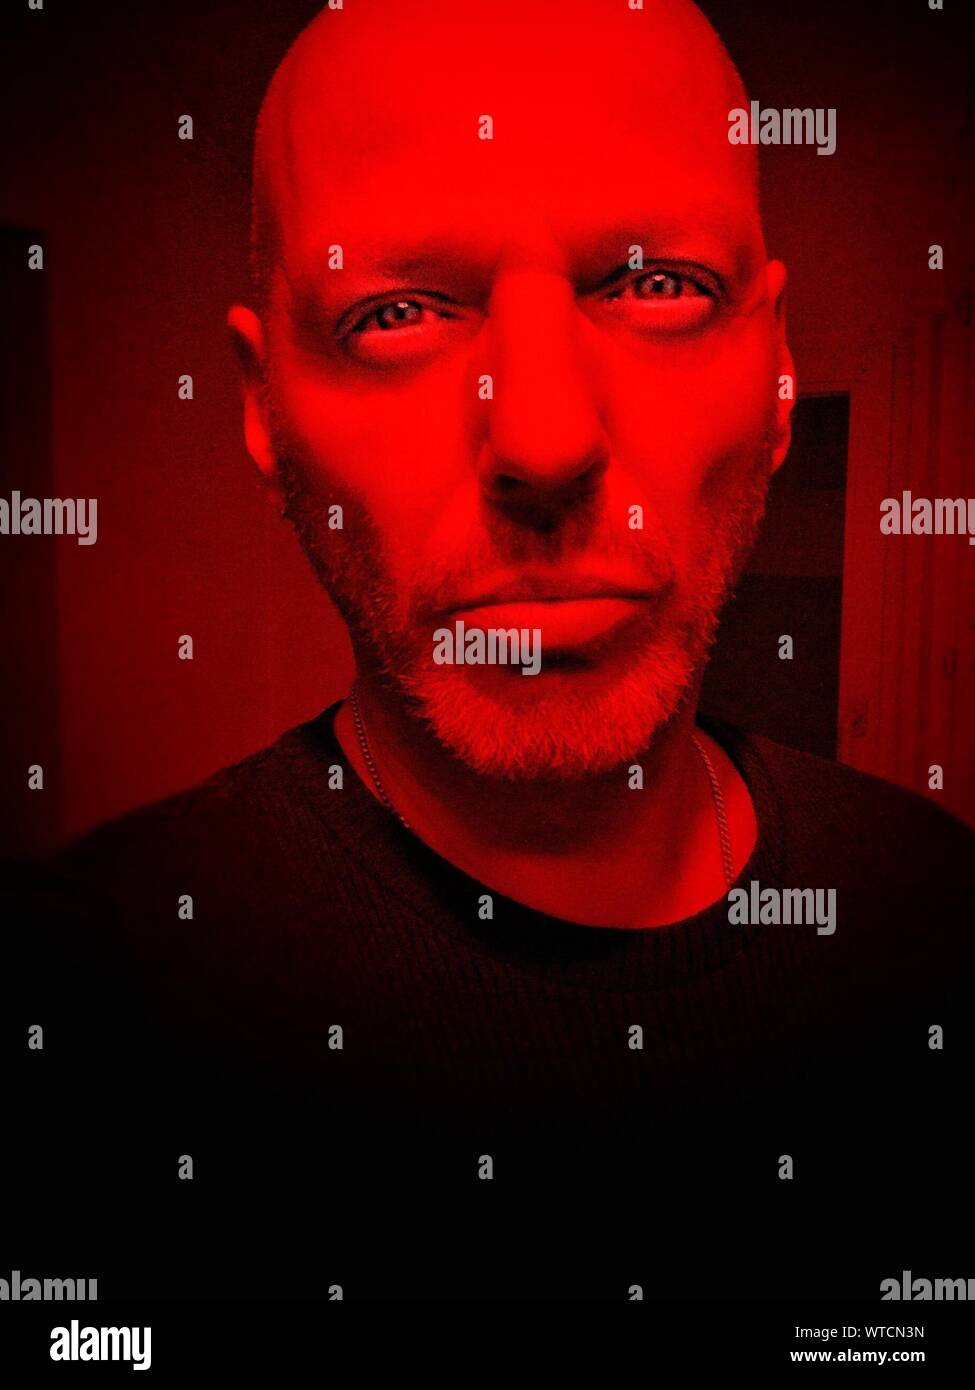 Close-up Portrait Of Bald Man In Illuminated Red Room Stock Photo